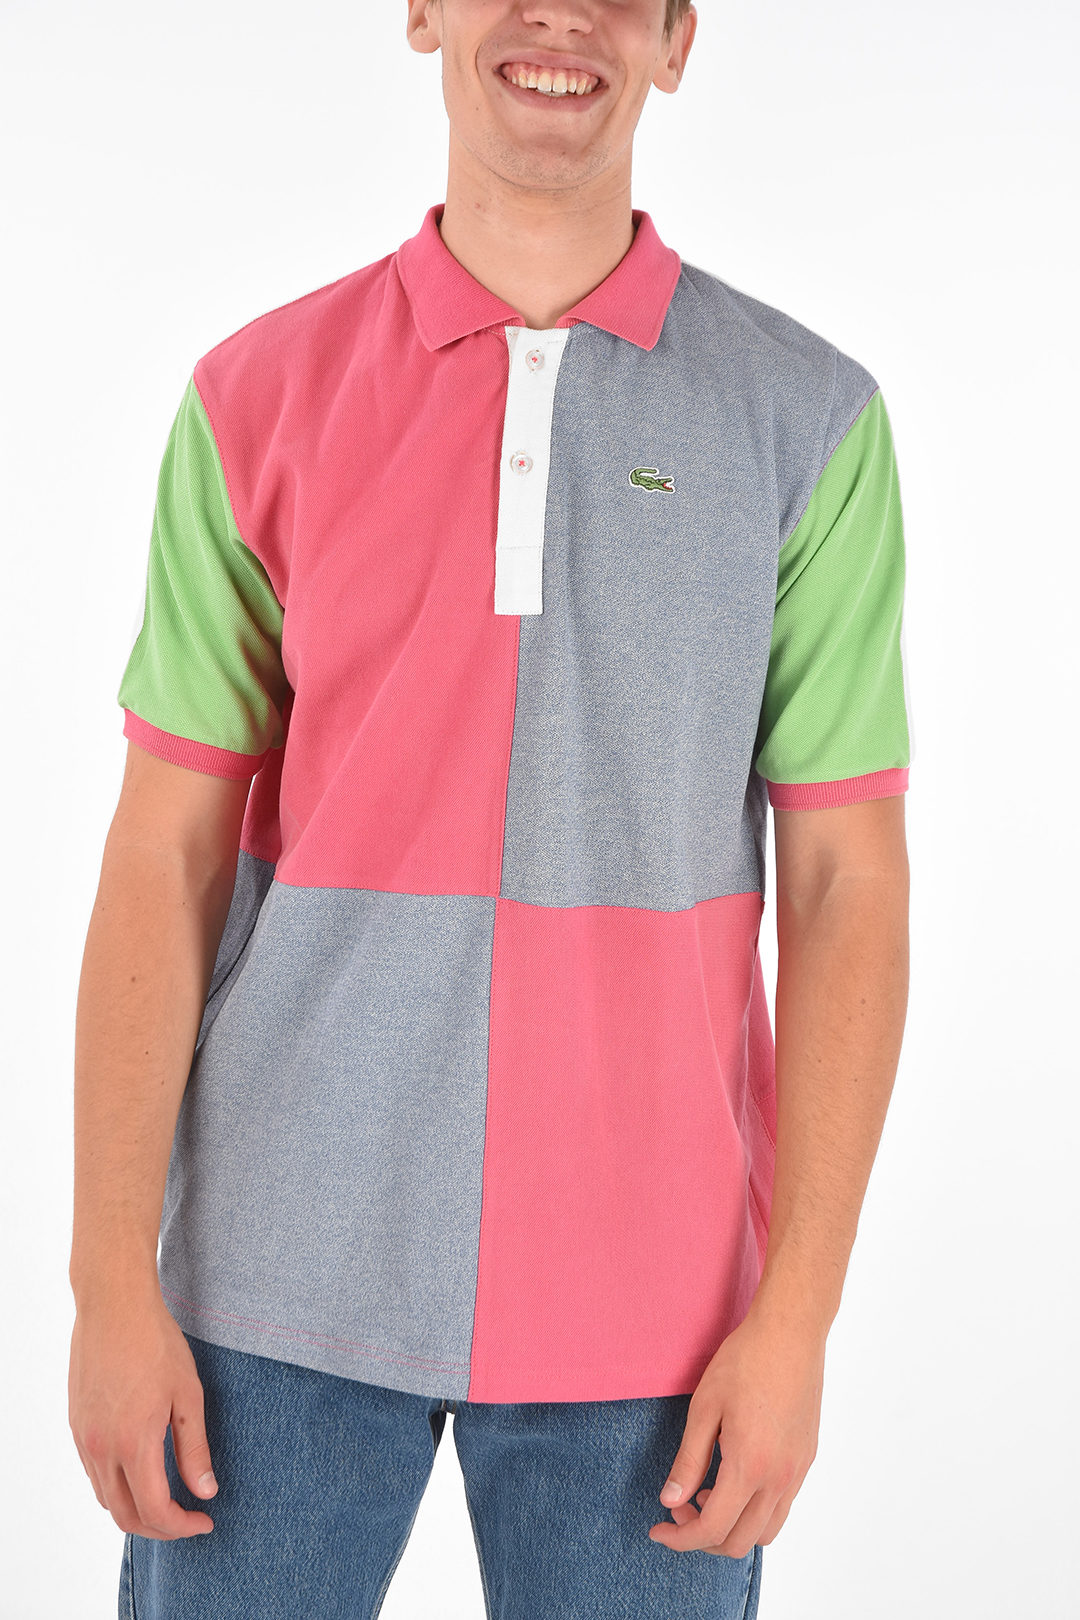 DDPR Customized LACOSTE Polo Shirt men - Glamood Outlet